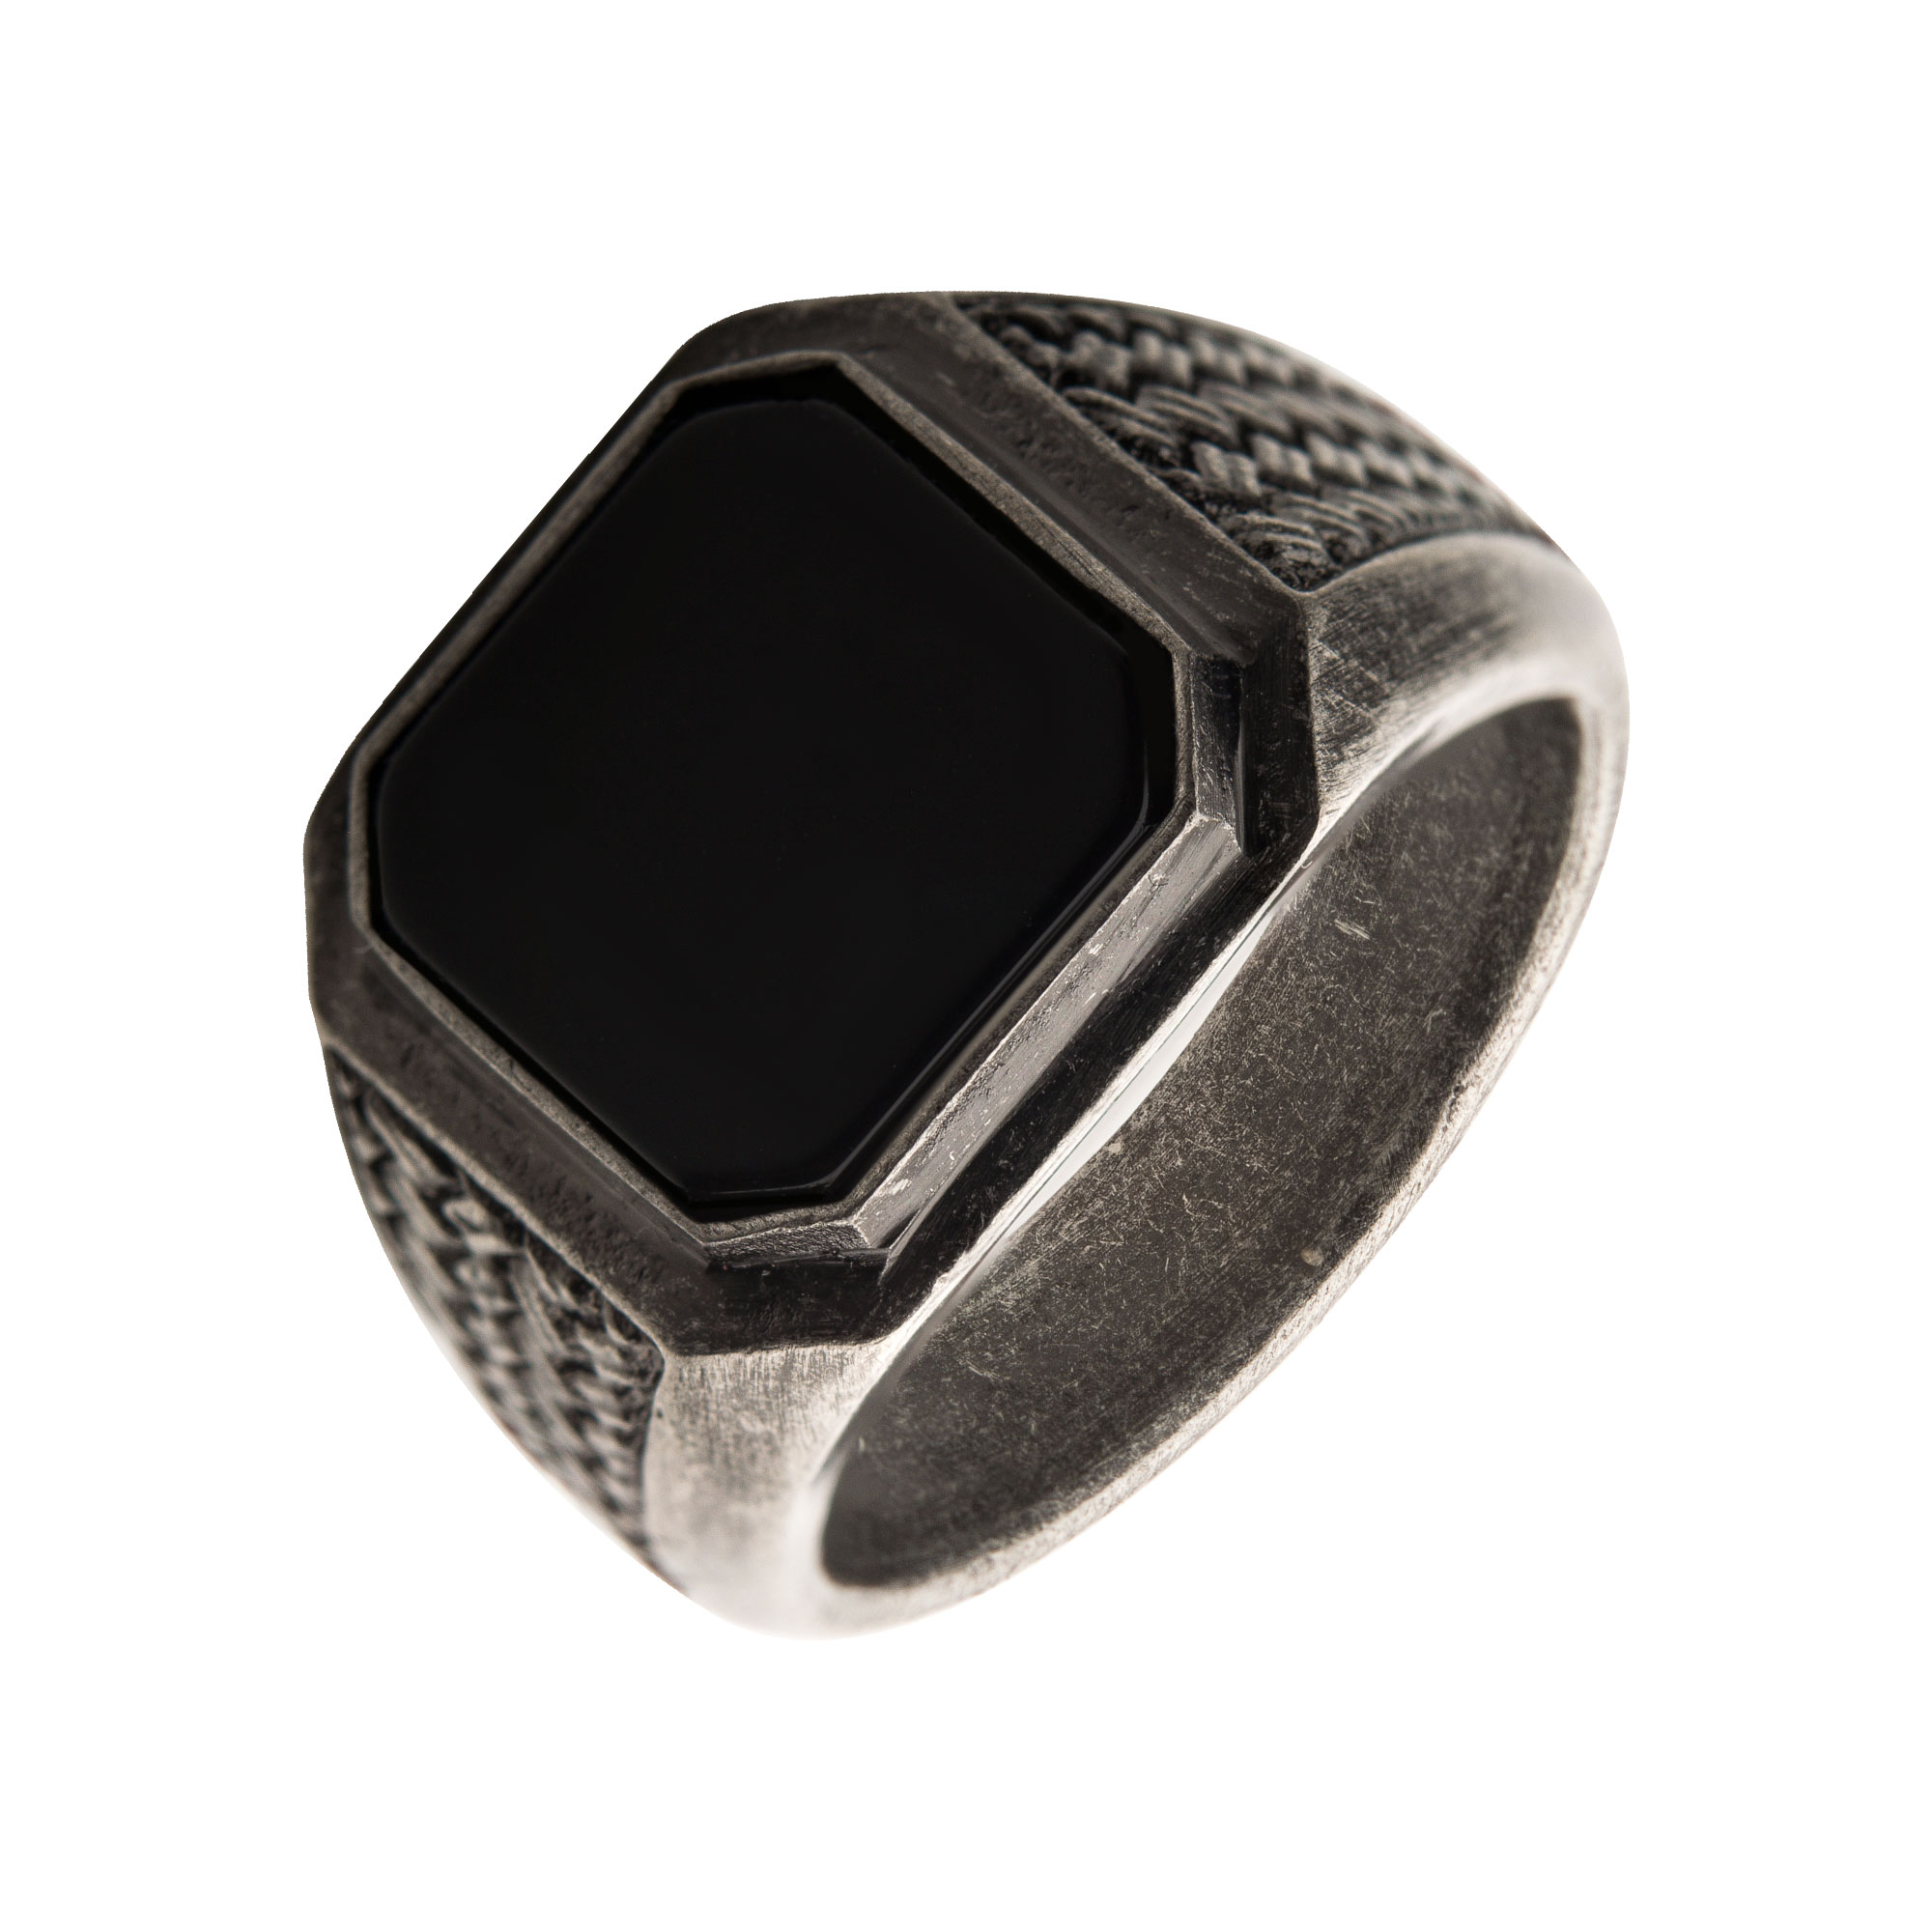 Stainless Steel Silver Plated with Black Agate Stone Ring Midtown Diamonds Reno, NV